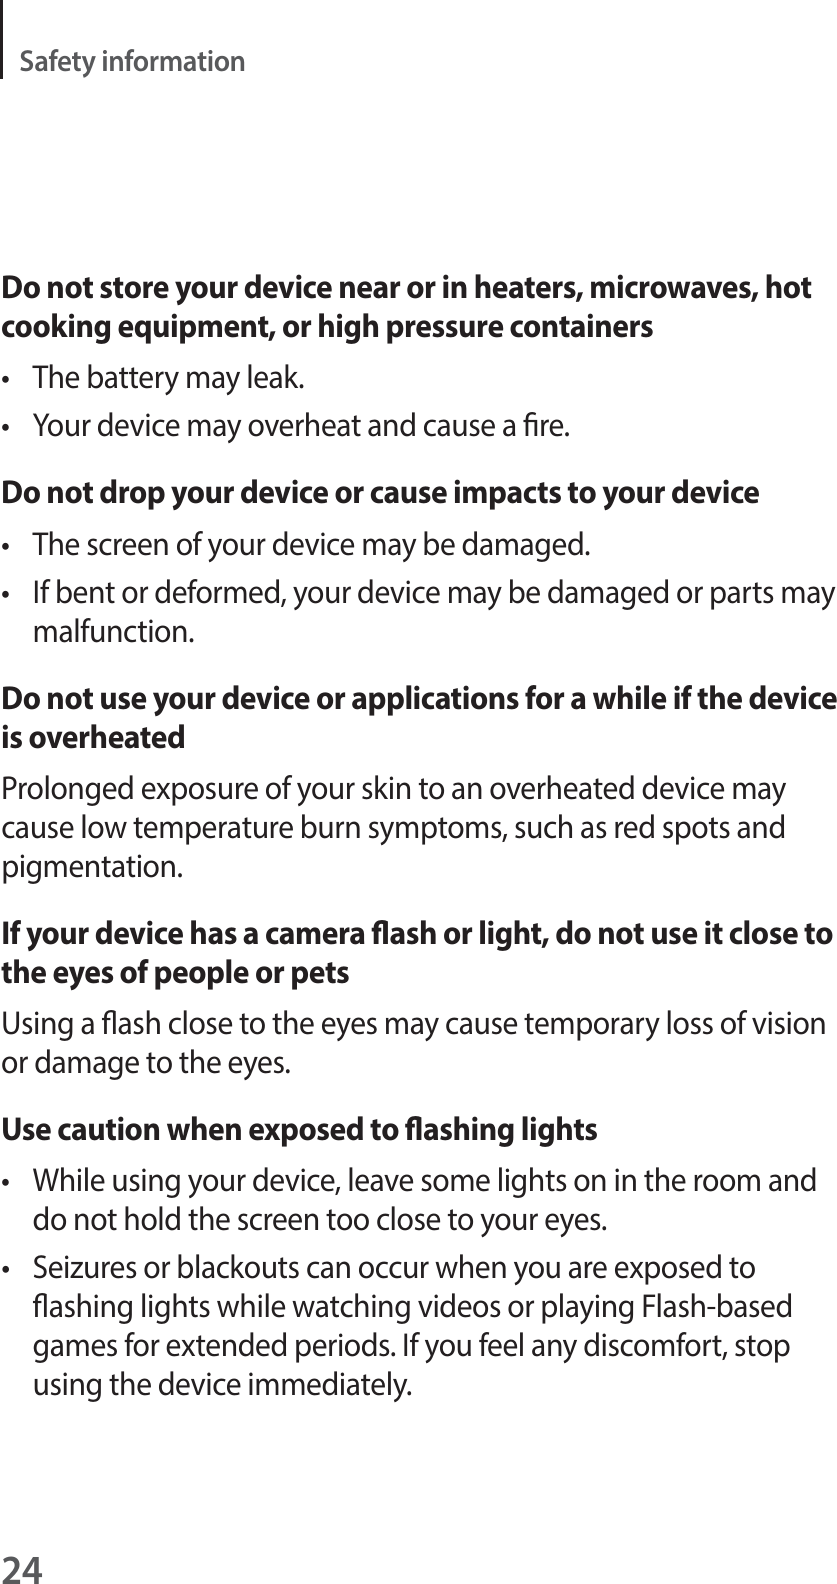 24Safety informationDo not store your device near or in heaters, microwaves, hot cooking equipment, or high pressure containerst  The battery may leak.t  Your device may overheat and cause a re.Do not drop your device or cause impacts to your devicet  The screen of your device may be damaged.t  If bent or deformed, your device may be damaged or parts may malfunction.Do not use your device or applications for a while if the device is overheatedProlonged exposure of your skin to an overheated device may cause low temperature burn symptoms, such as red spots and pigmentation.If your device has a camera ash or light, do not use it close to the eyes of people or petsUsing a ash close to the eyes may cause temporary loss of vision or damage to the eyes.Use caution when exposed to ashing lightst  While using your device, leave some lights on in the room and do not hold the screen too close to your eyes.t  Seizures or blackouts can occur when you are exposed to ashing lights while watching videos or playing Flash-based games for extended periods. If you feel any discomfort, stop using the device immediately.